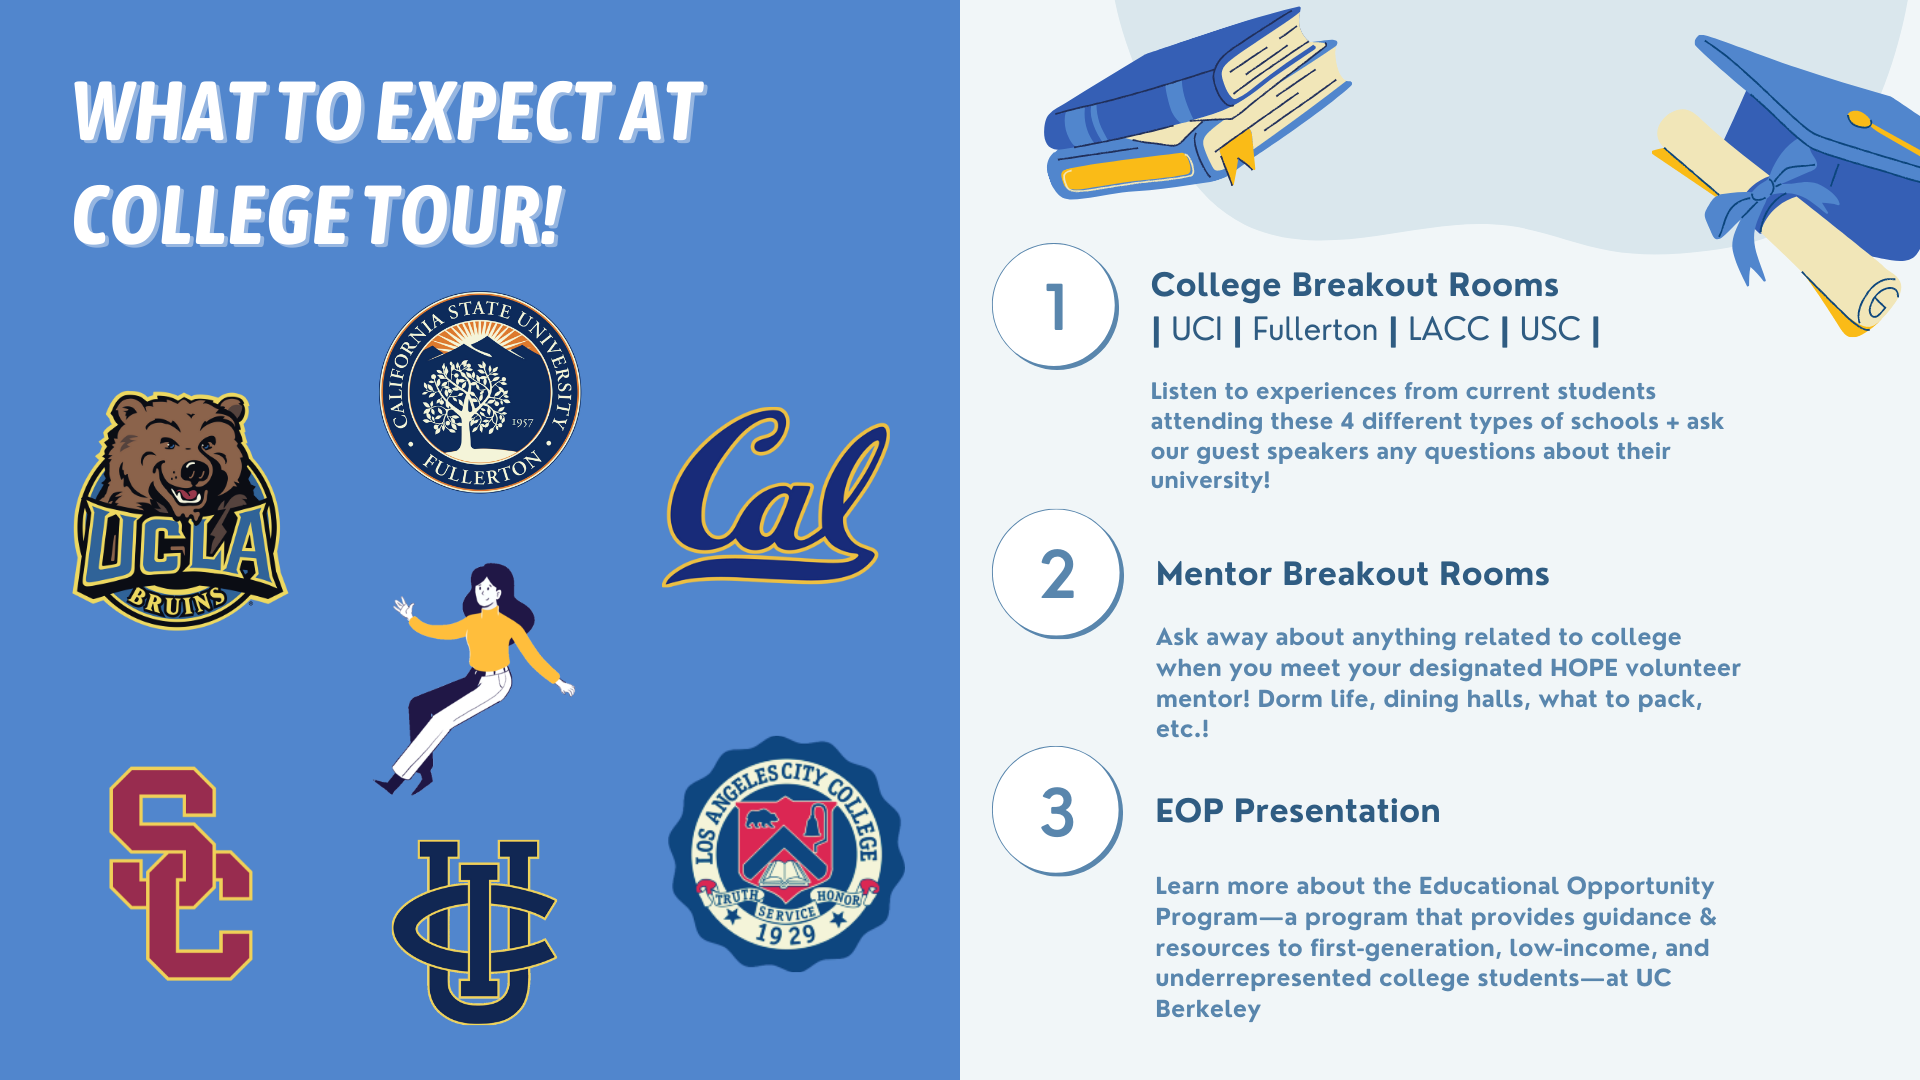 Learn more about the different types of higher education and get first-hand experience of what college is like including dorms and dining halls!